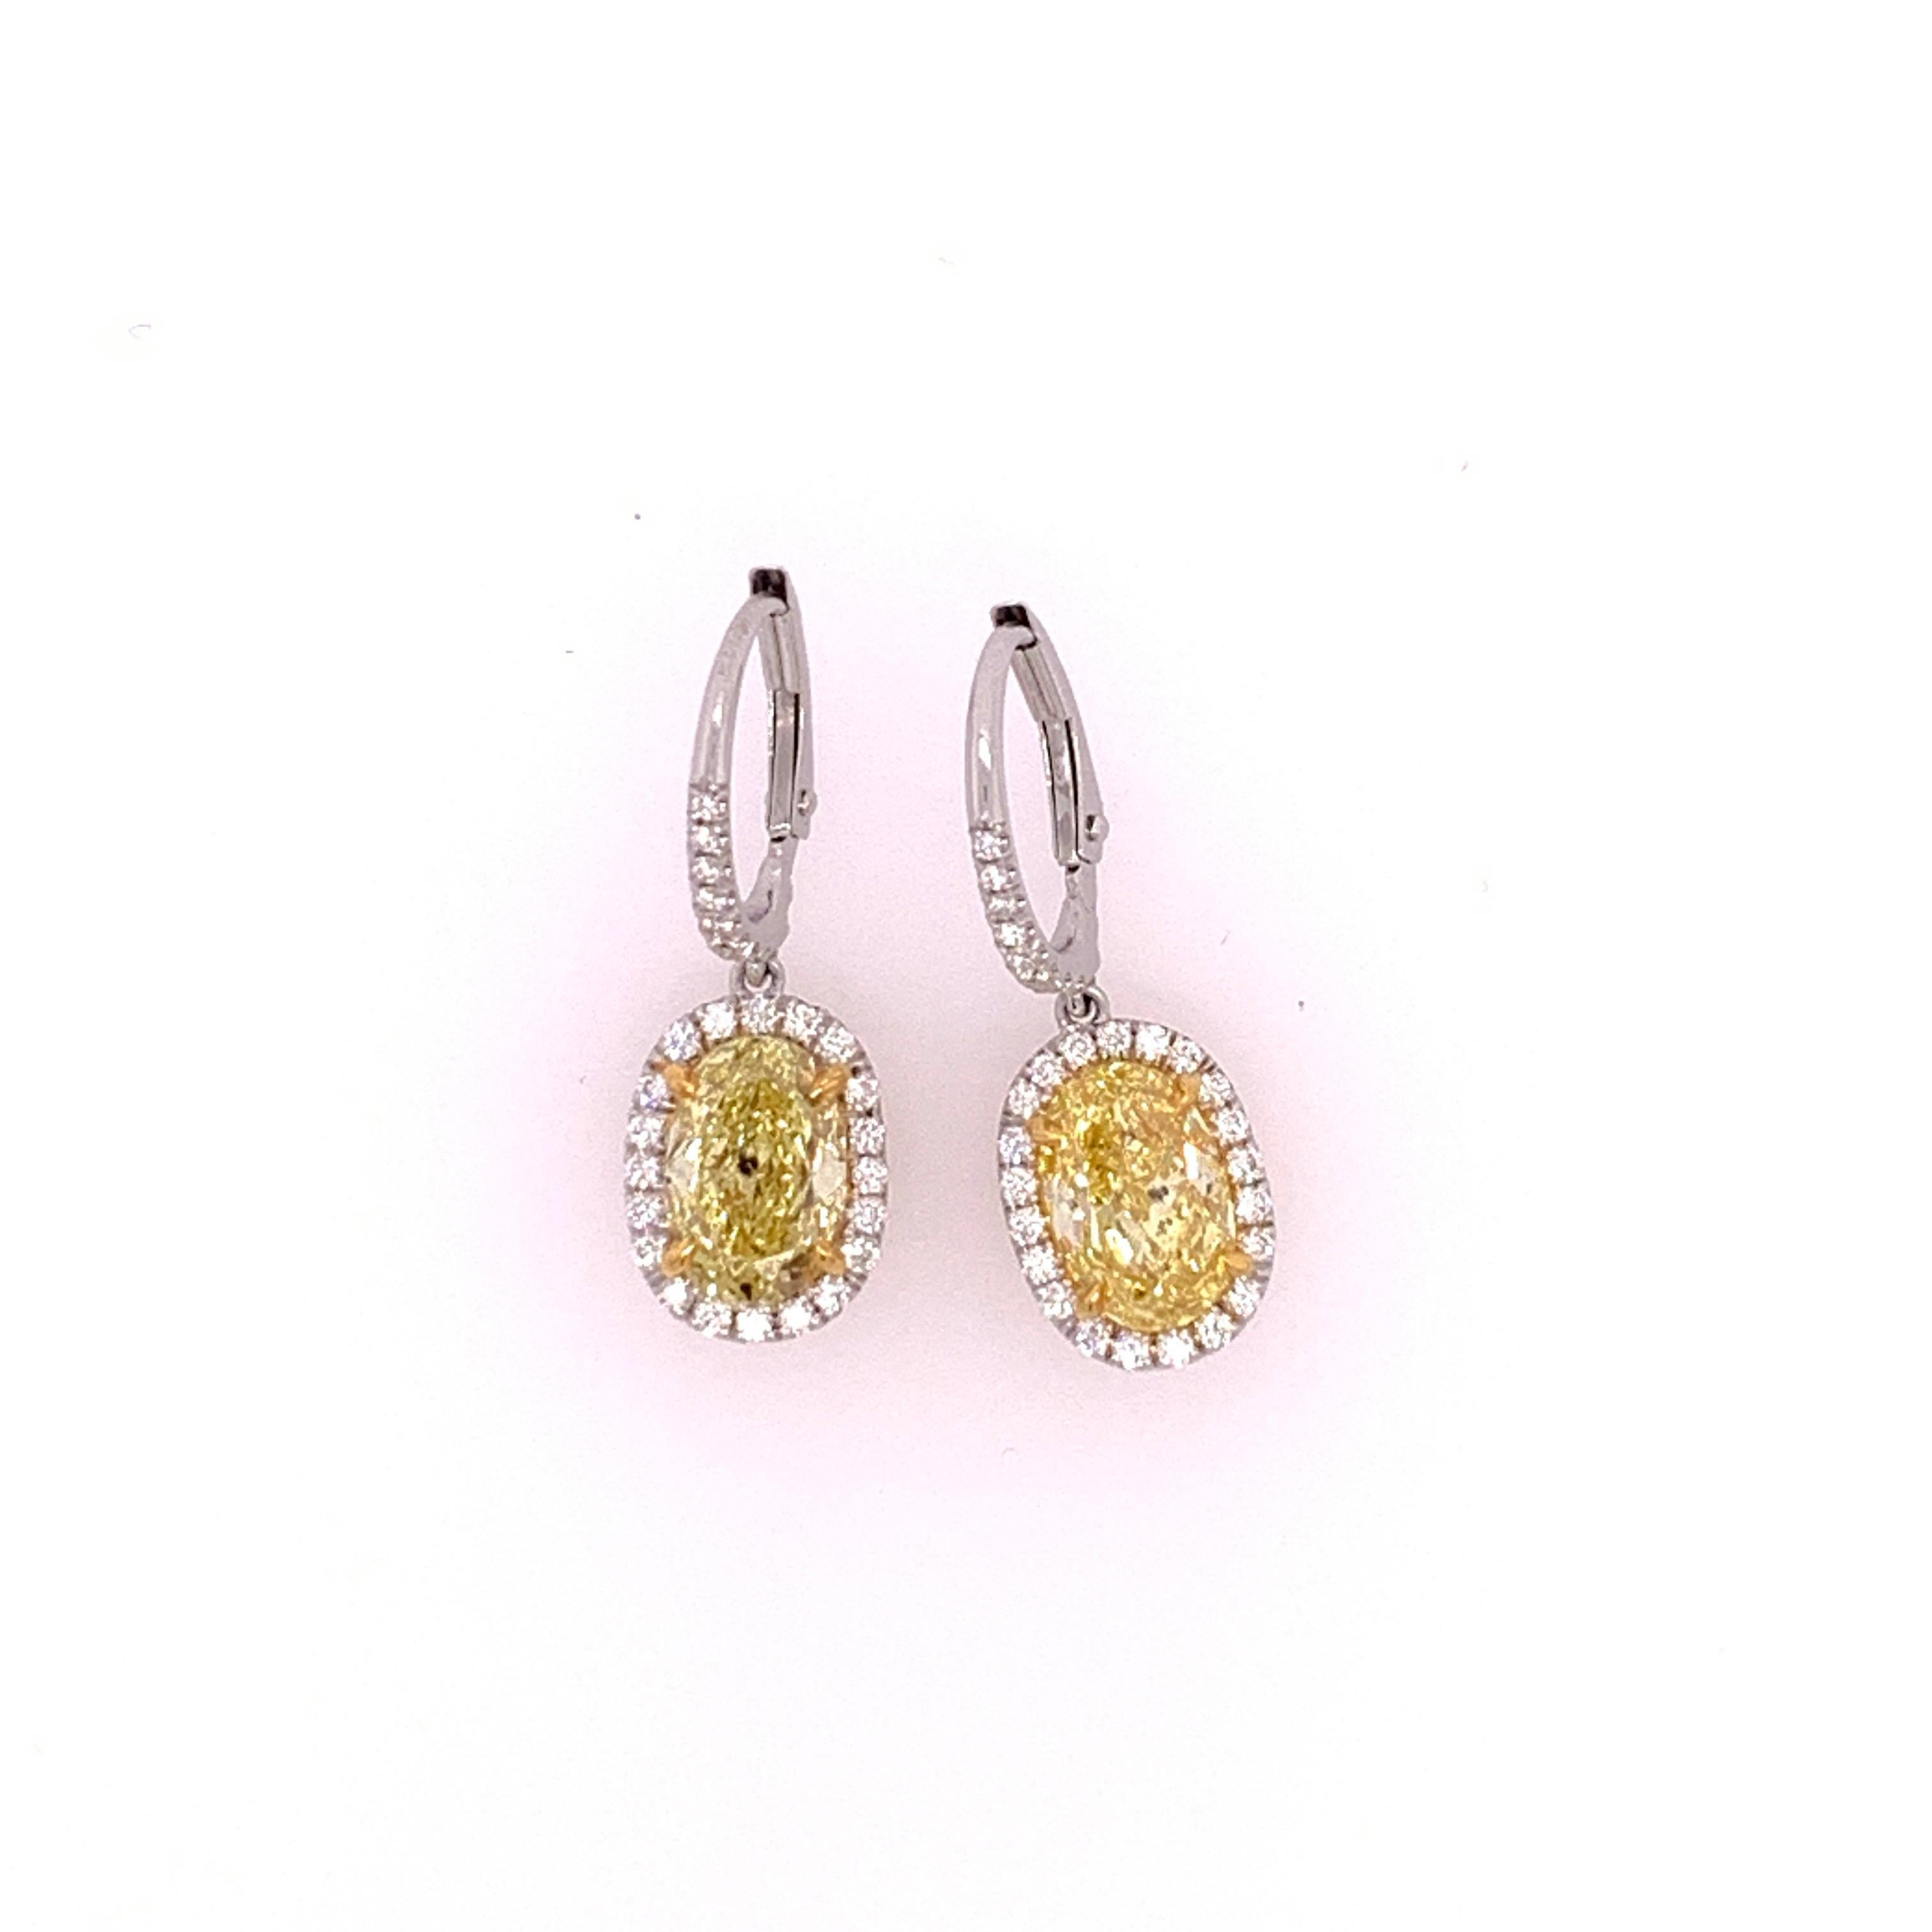 Platinum diamond earrings set with 0.42cts of colorless round brilliant diamonds. The yellow ovals are natural strong canary color. The cut on these Ovals are ideal proportions making it look larger than its weight, each stone has the measurements